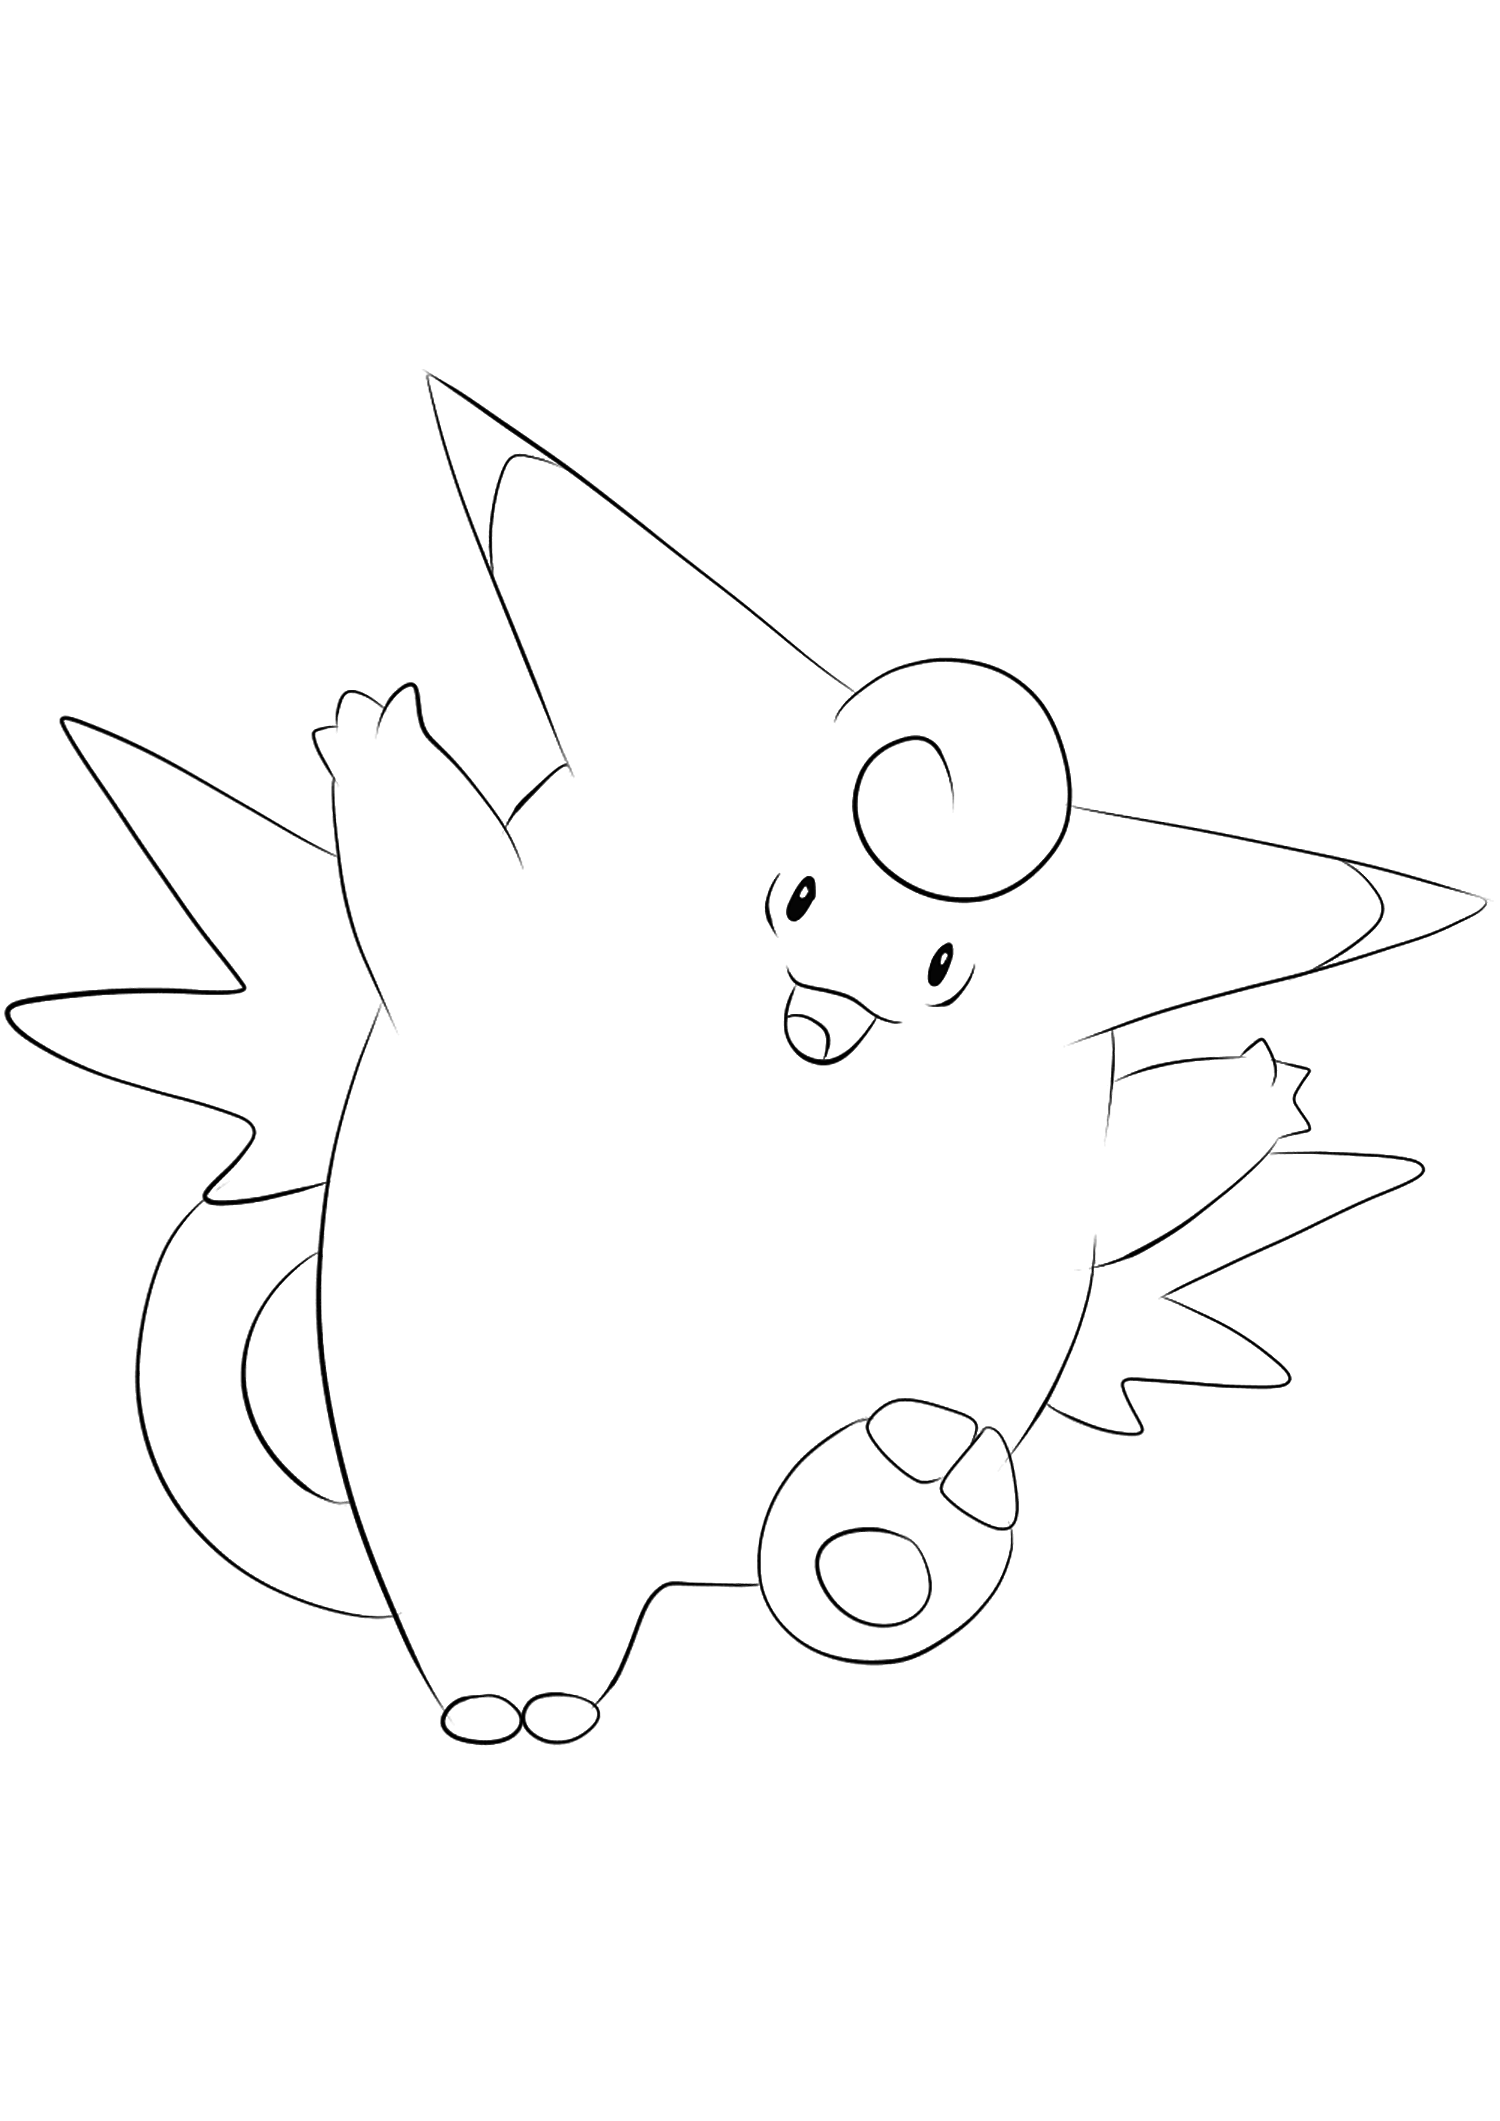 Clefable (No.36). Clefable Coloring page, Generation I Pokemon of type FairyOriginal image credit: Pokemon linearts by Lilly Gerbil'font-size:smaller;color:gray'>Permission: All rights reserved © Pokemon company and Ken Sugimori.